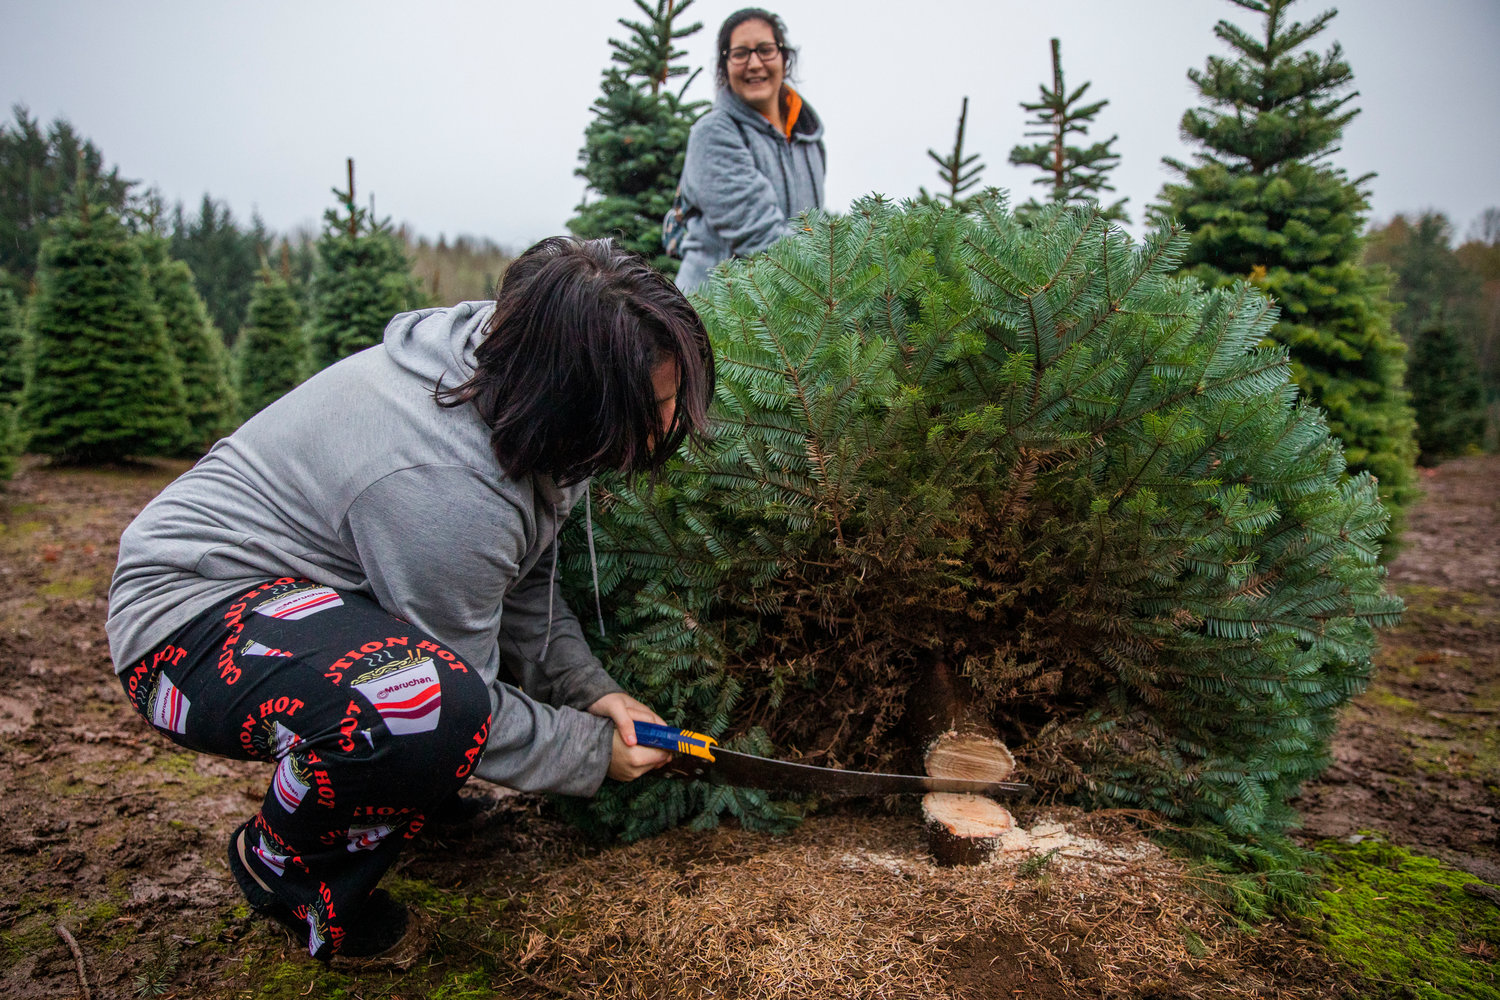 Winona Gladue smiles smiles and watches as her daughter Lily, 13, uses a saw to chop down a tree at the Mistletoe Tree Farm west of Chehalis on Friday.